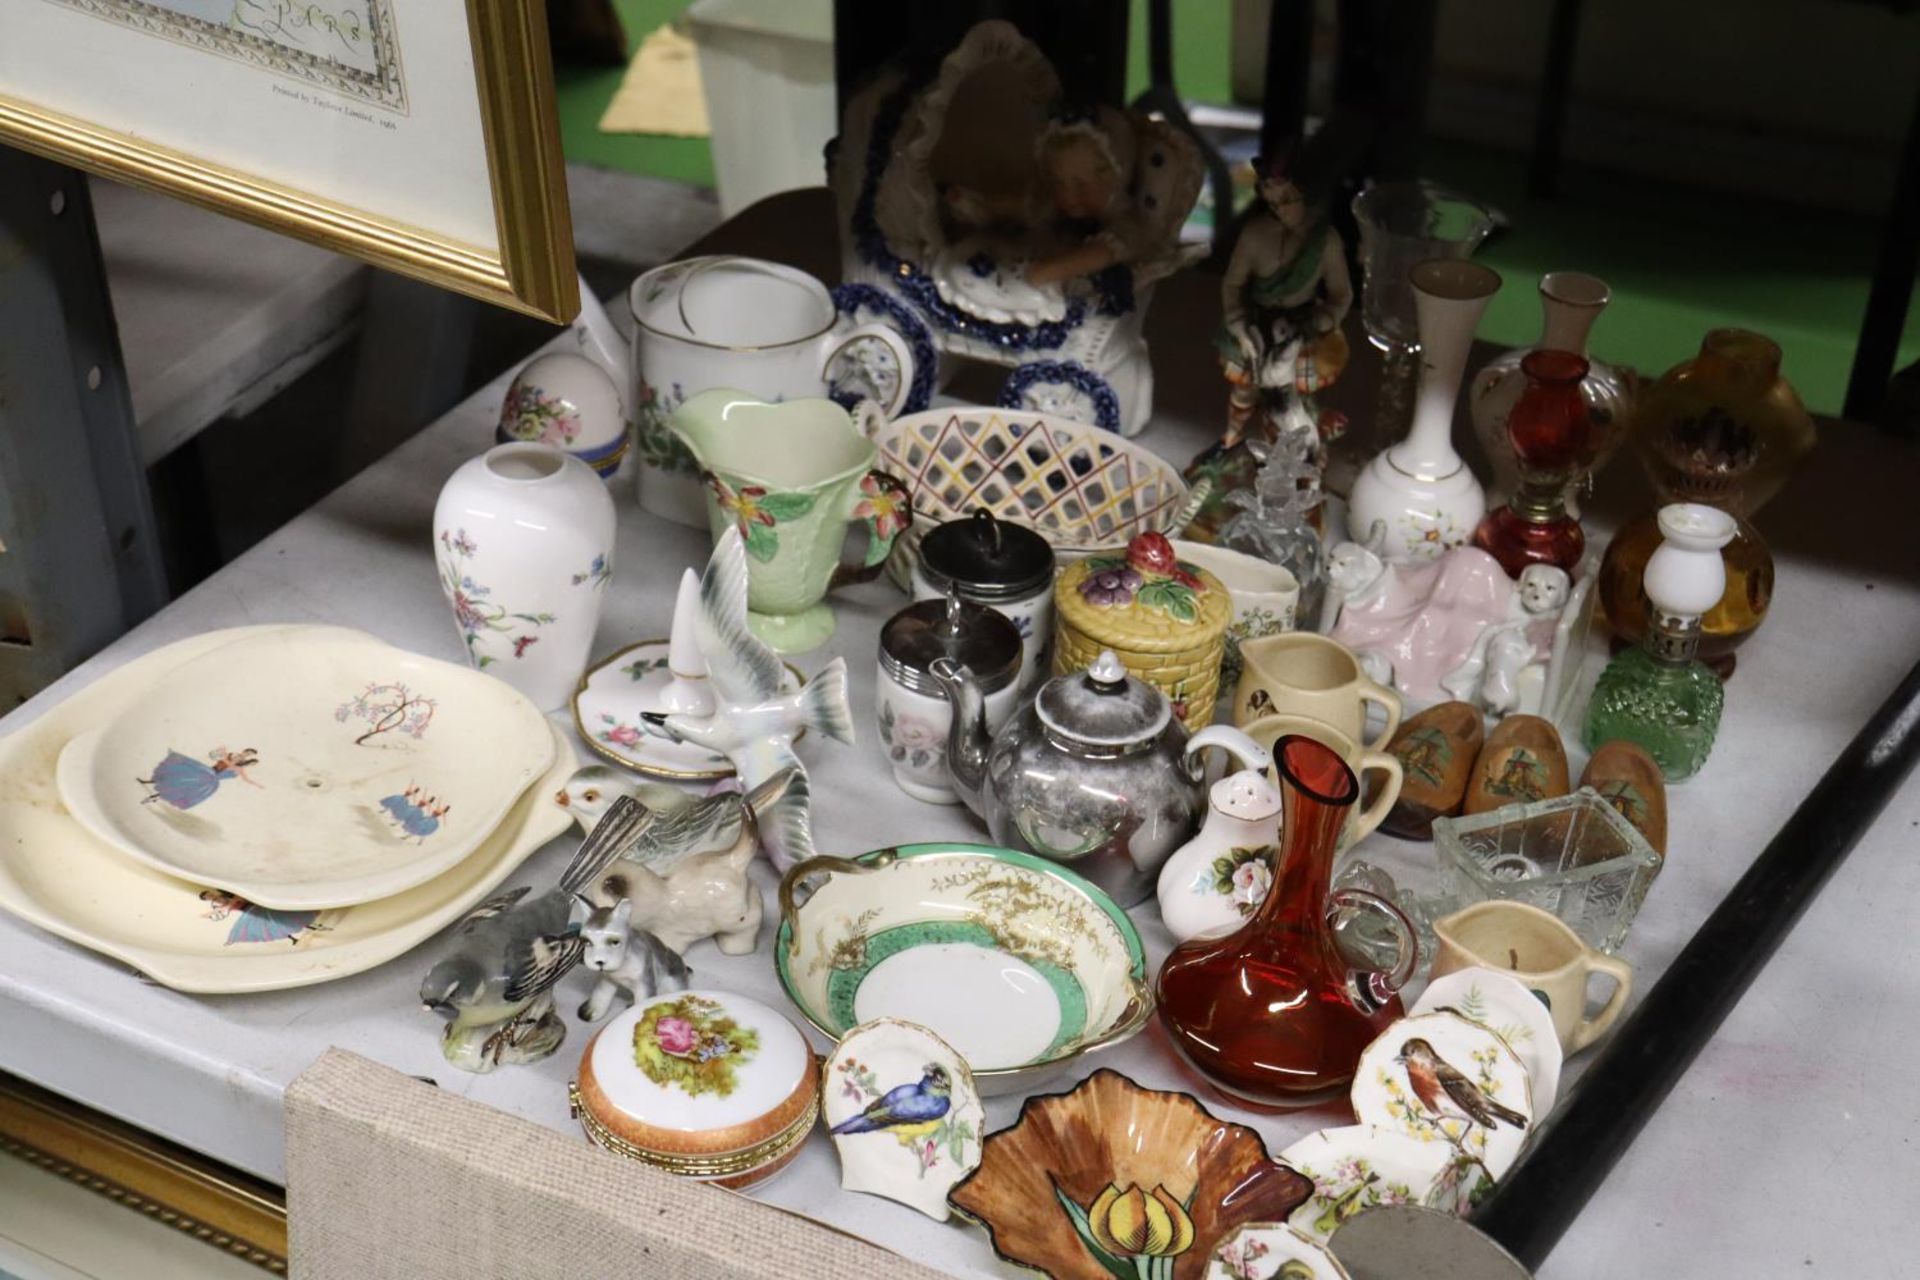 A LARGE, VINTAGE COLLECTION OF CERAMICS TO INCLUDE FIGURES, BIRDS, JUGS, BOWLS, SMALL PLATES, ETC